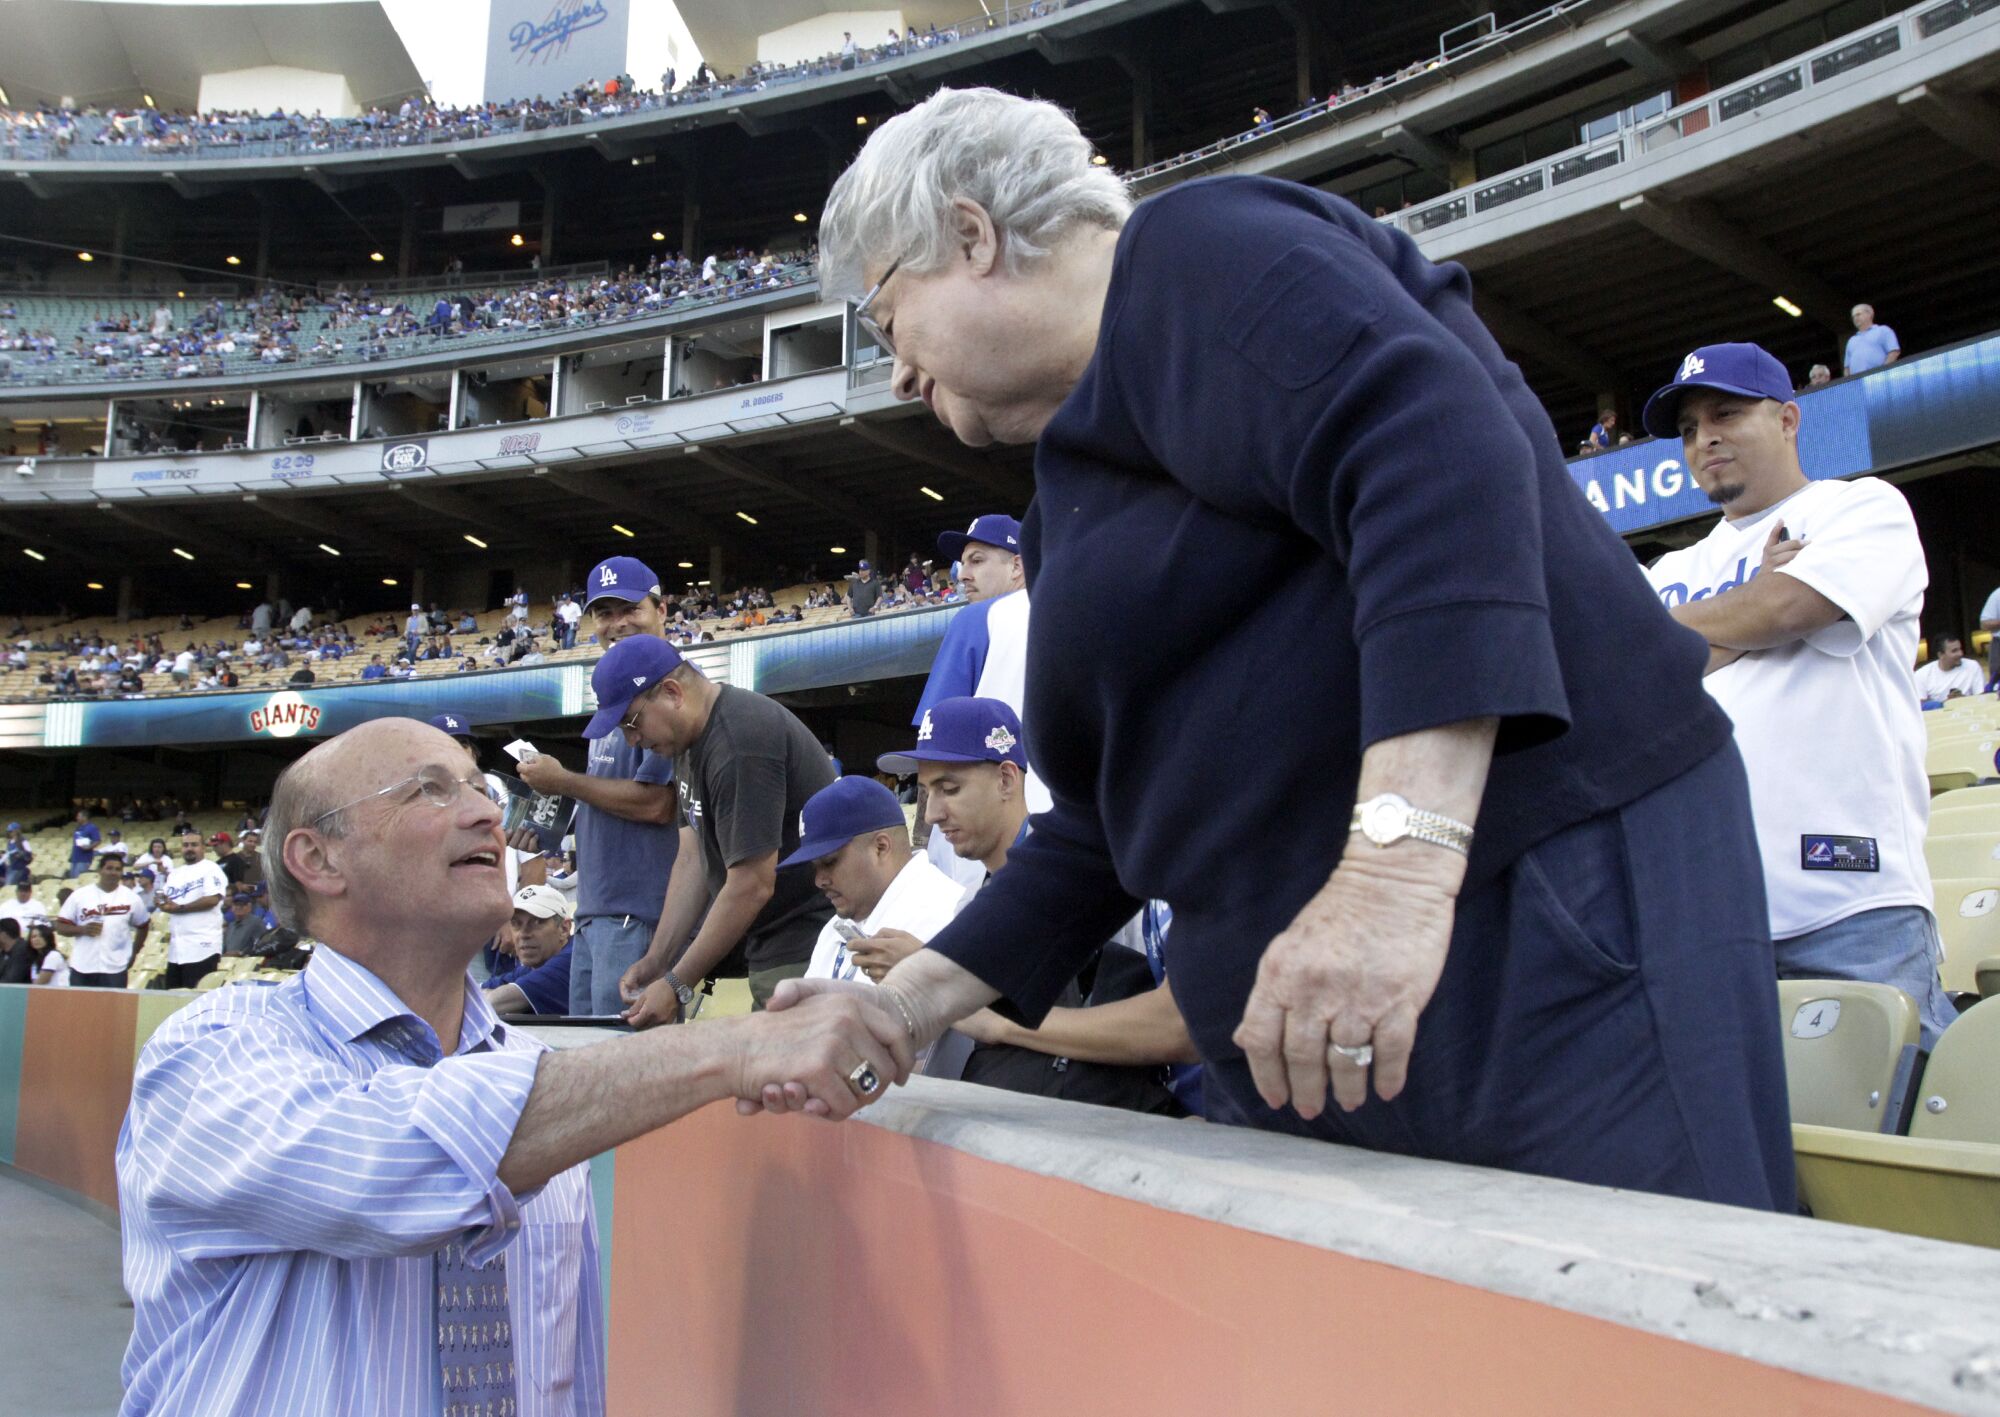 Dodgers' co-owner Stan Kasten greeting former LA City Councilwoman Roz Wyman before the game 